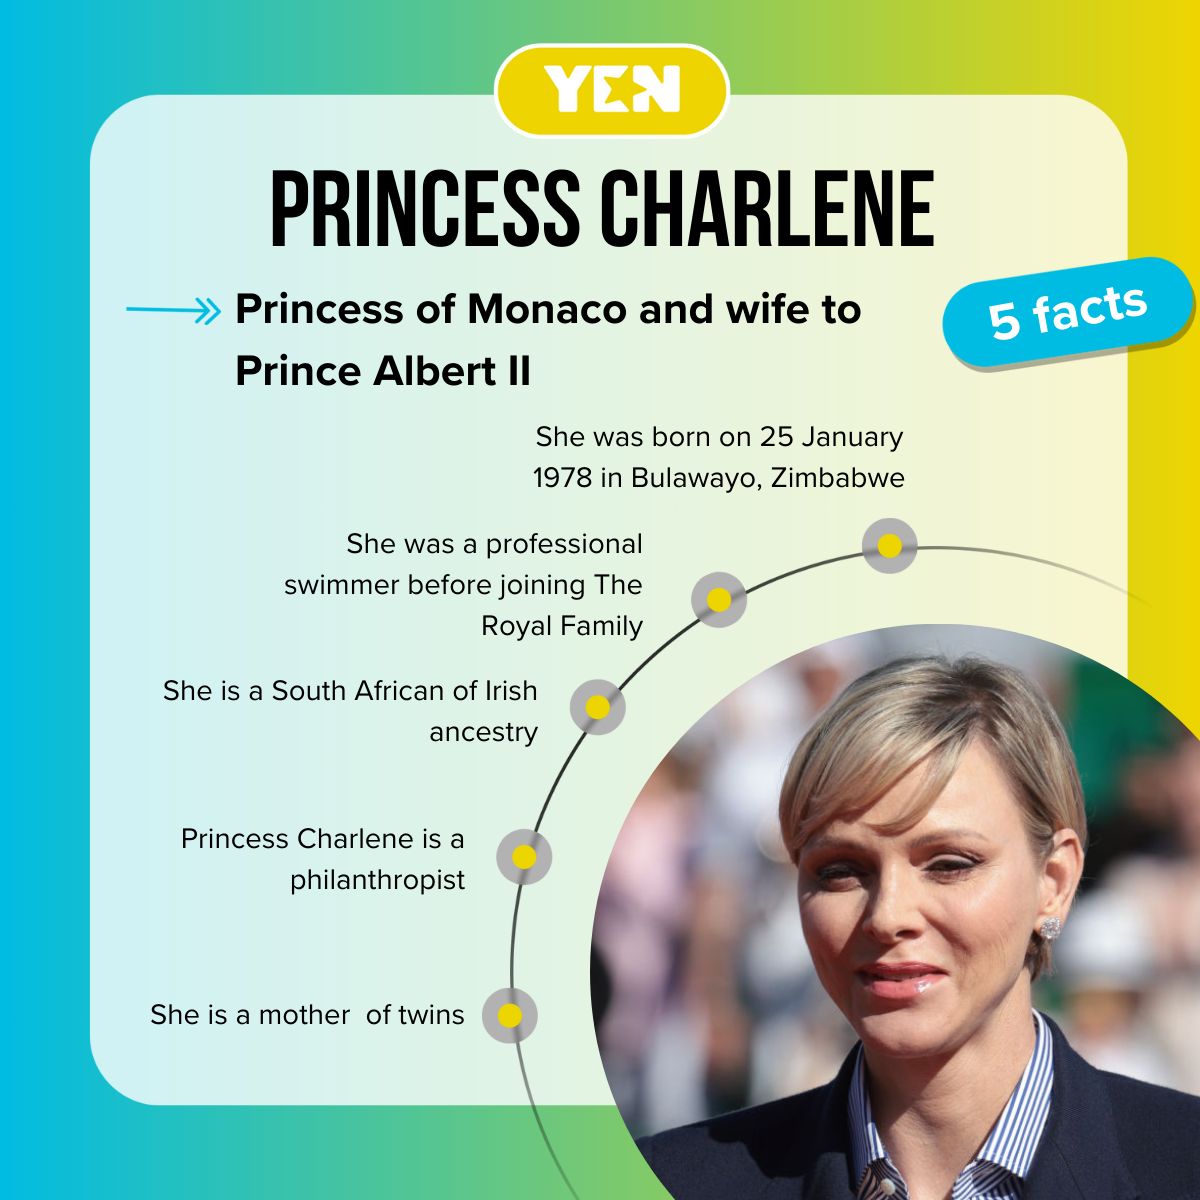 Facts about Princess Charlene